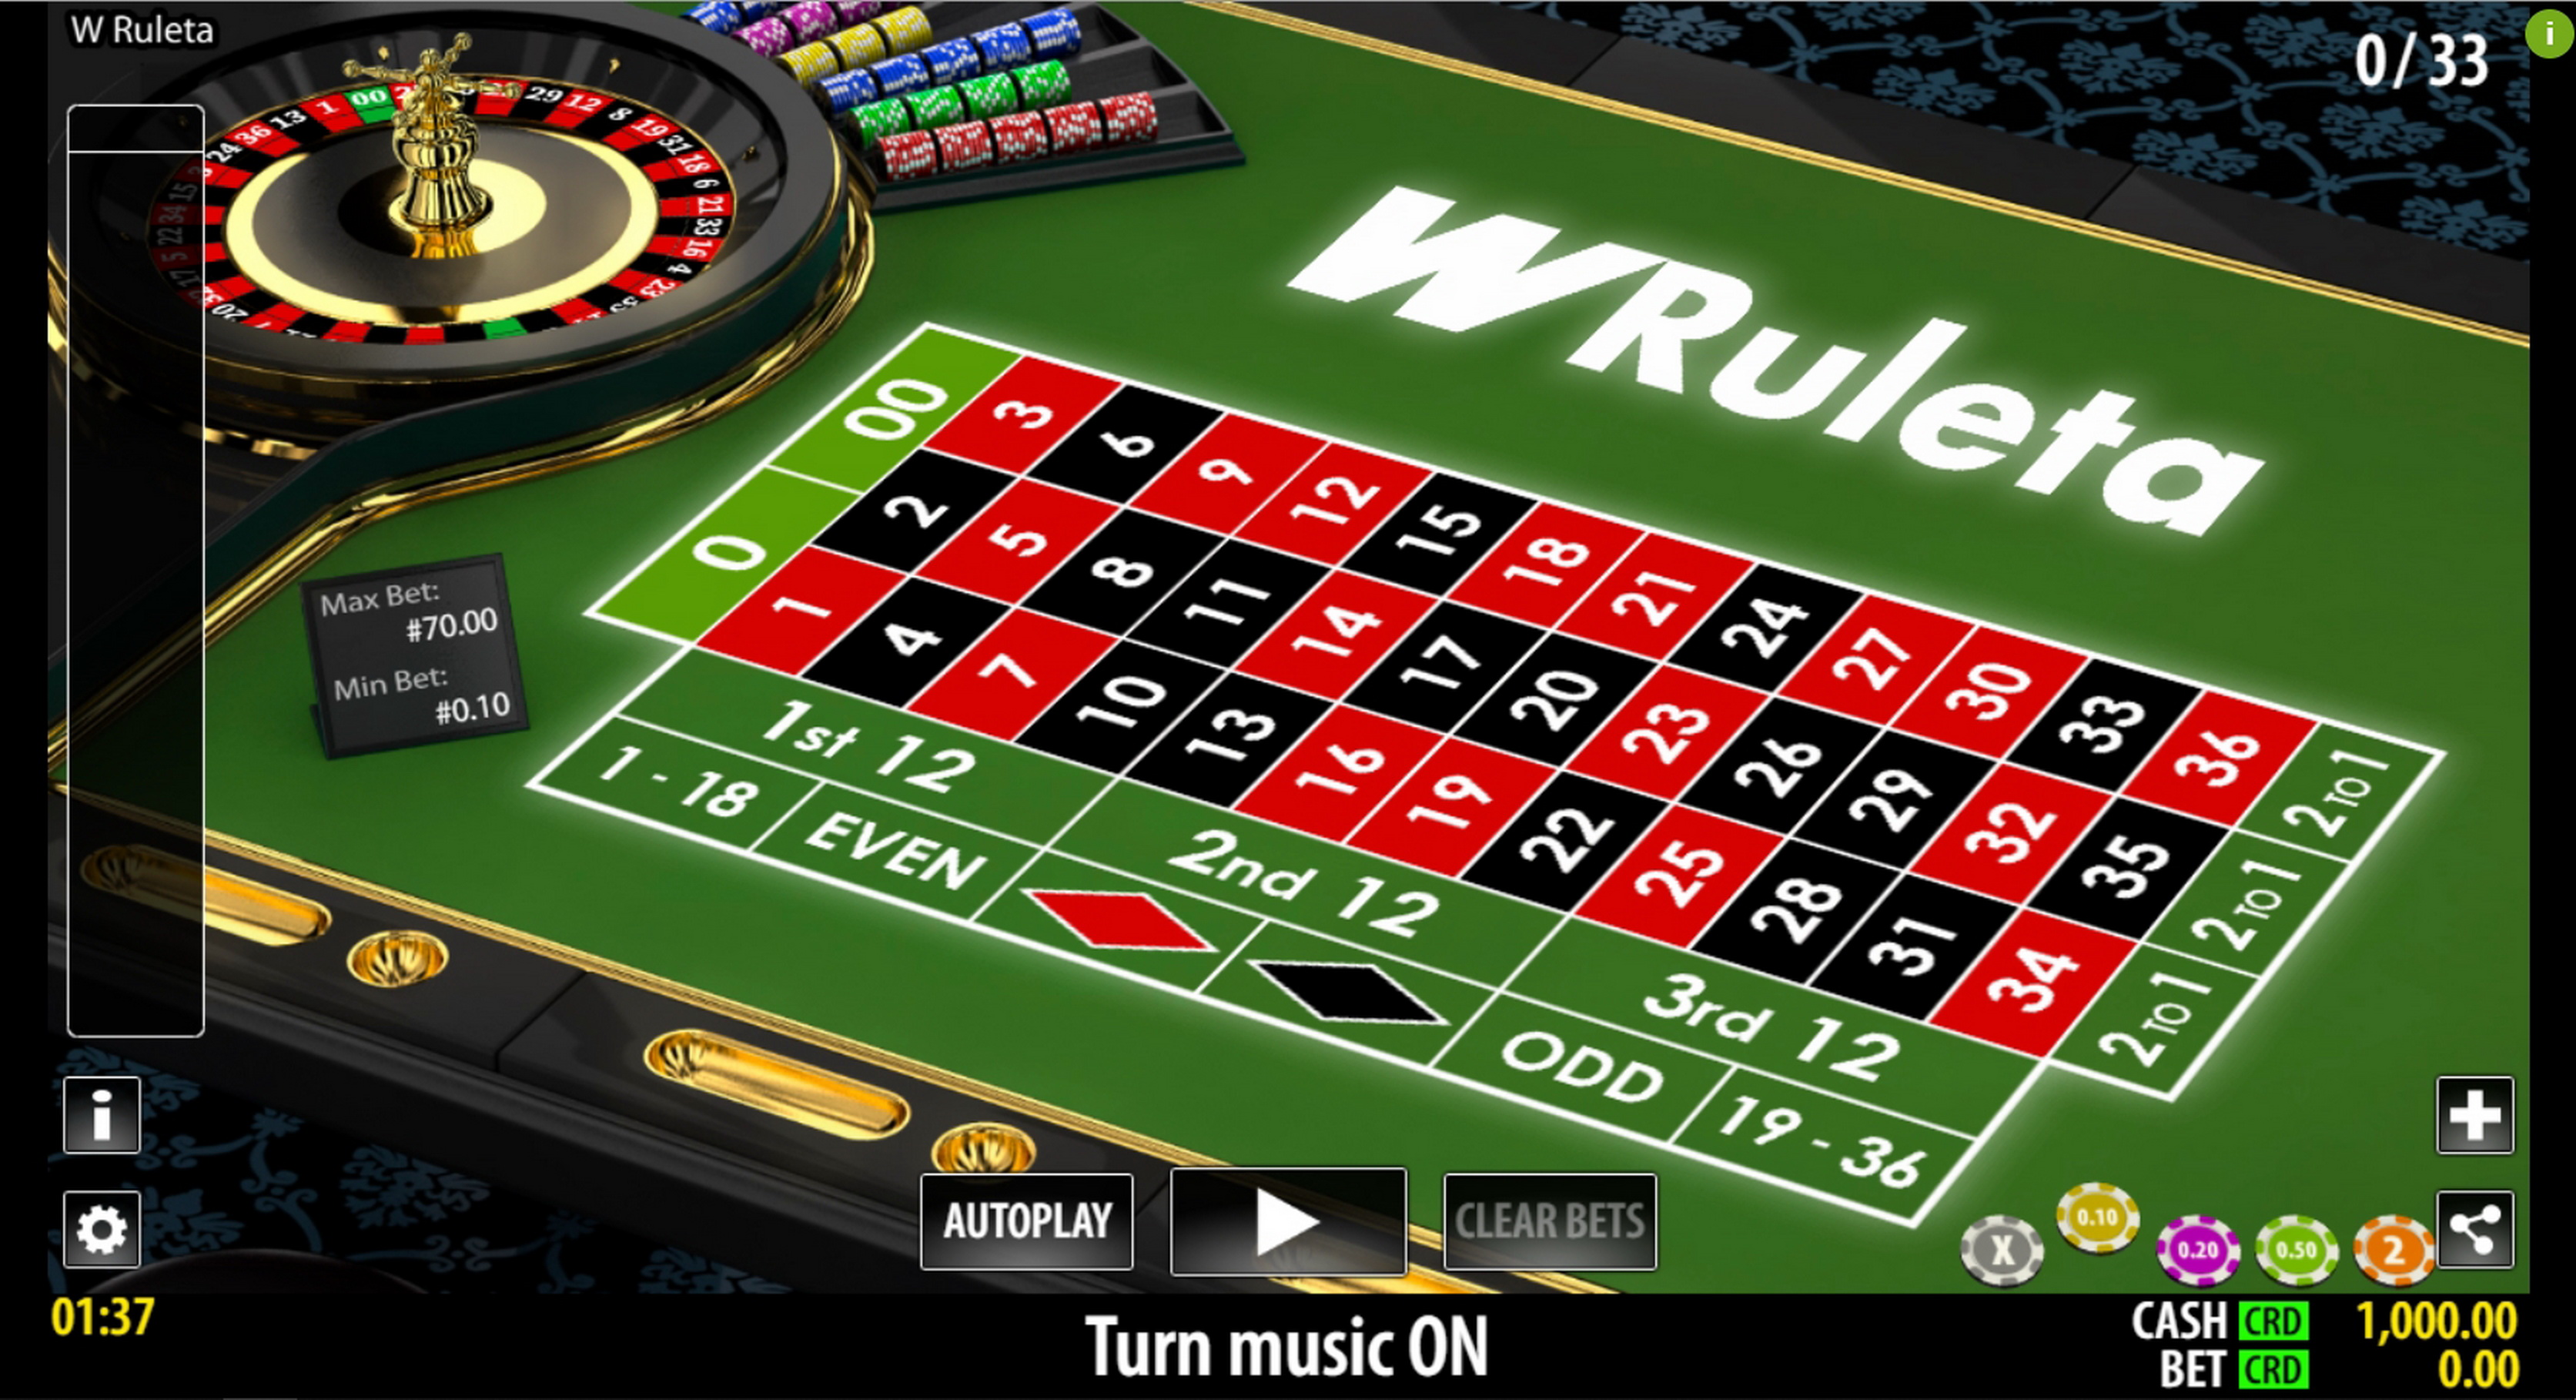 Reels in W Ruleta Slot Game by World Match